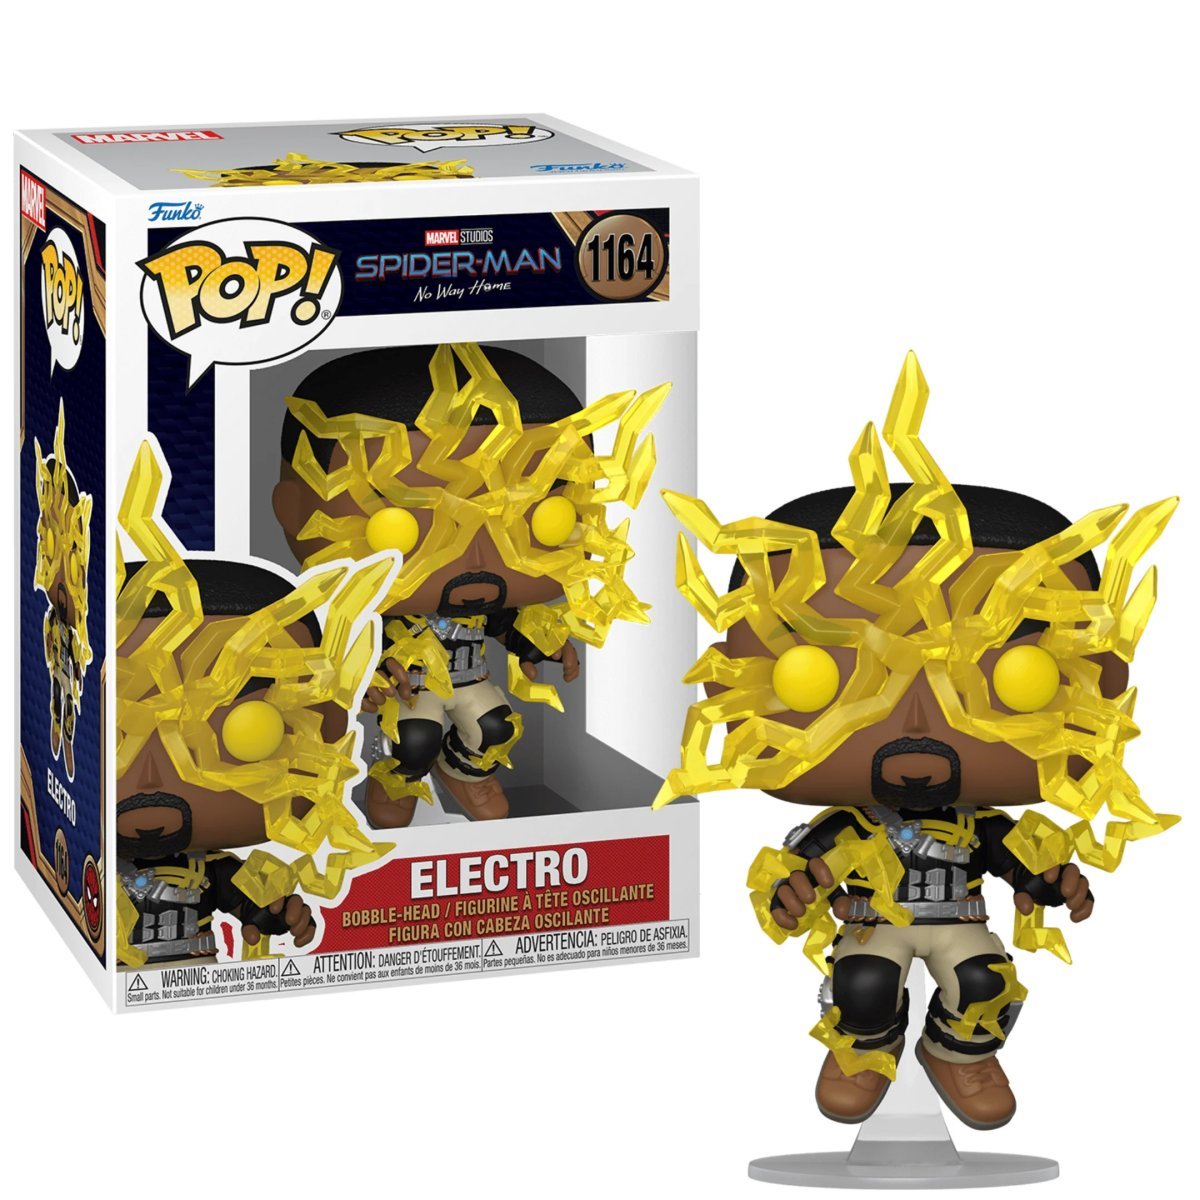 Electro Funko Pop, displayed in and out of box (Funko)